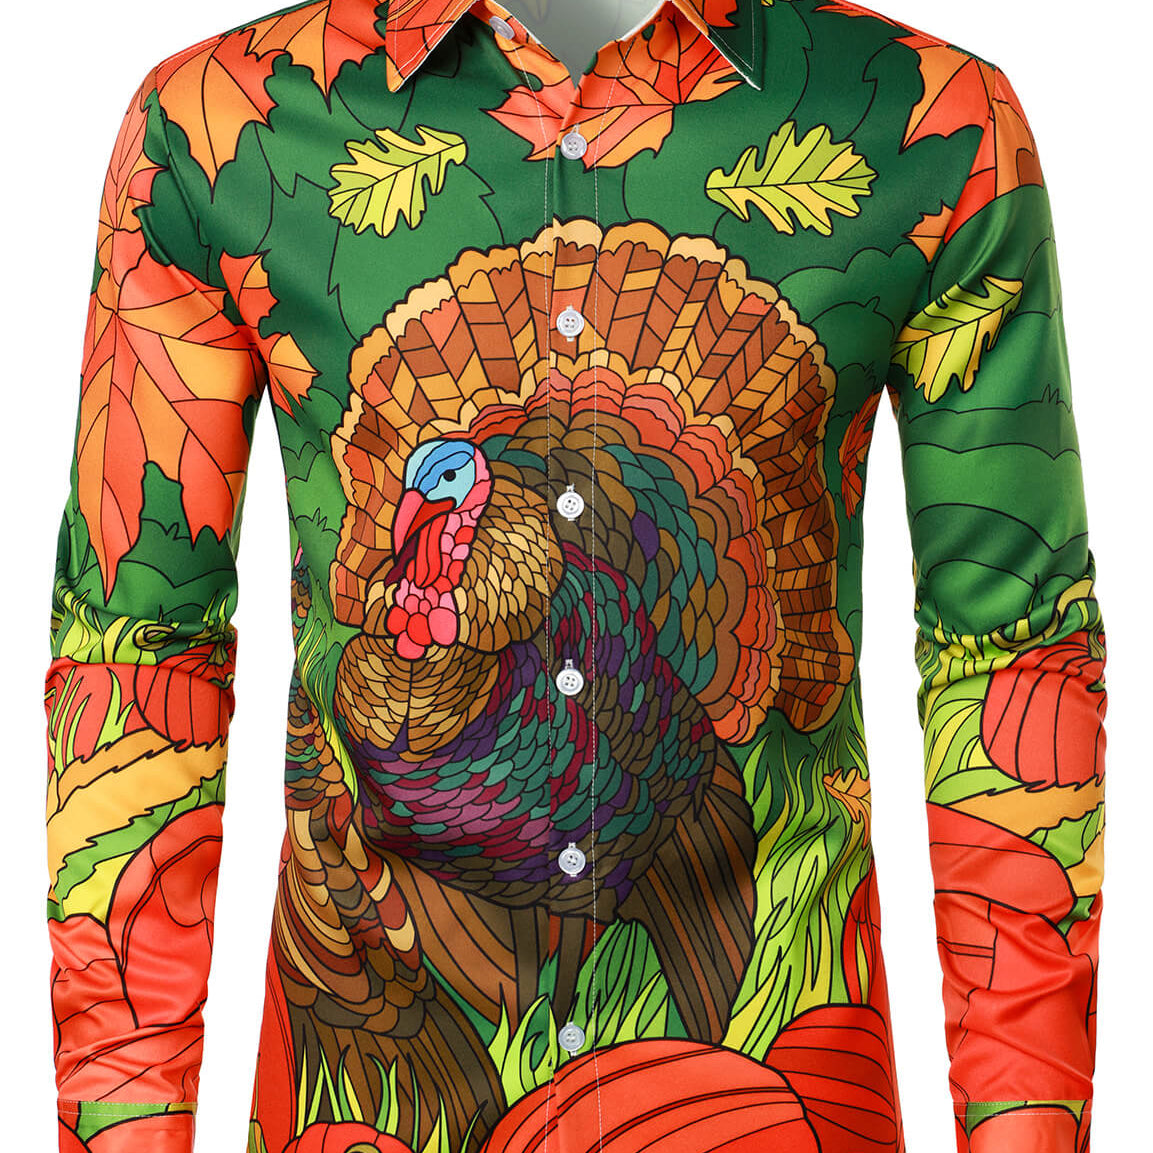 Men's Thanksgiving Day Party Funny Turkey Button Long Sleeve Shirt